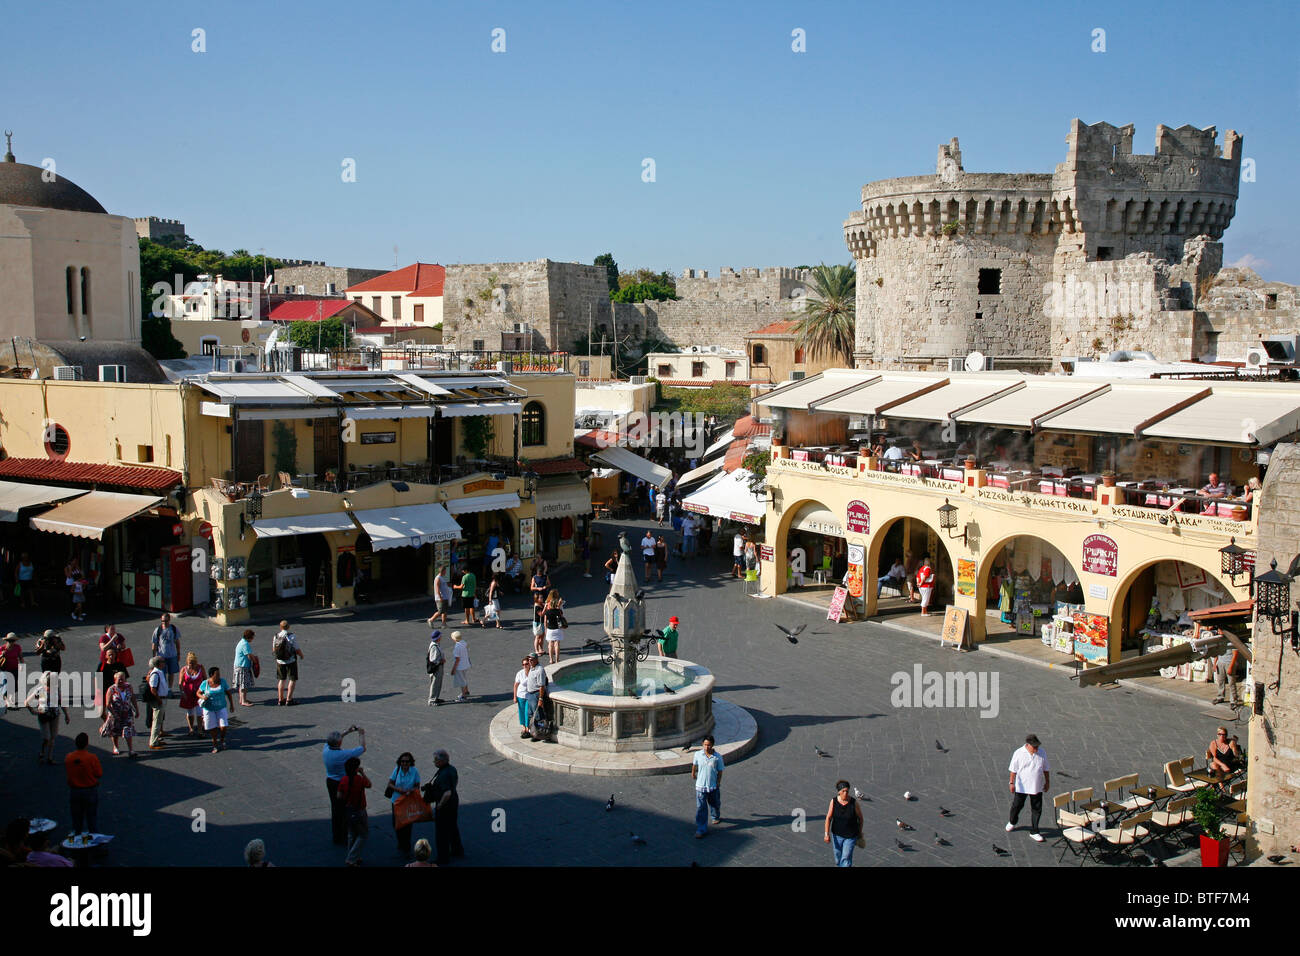 View over Hippocrates square and the castellania building, Rhodes old town, Rhodes, Greece. Stock Photo